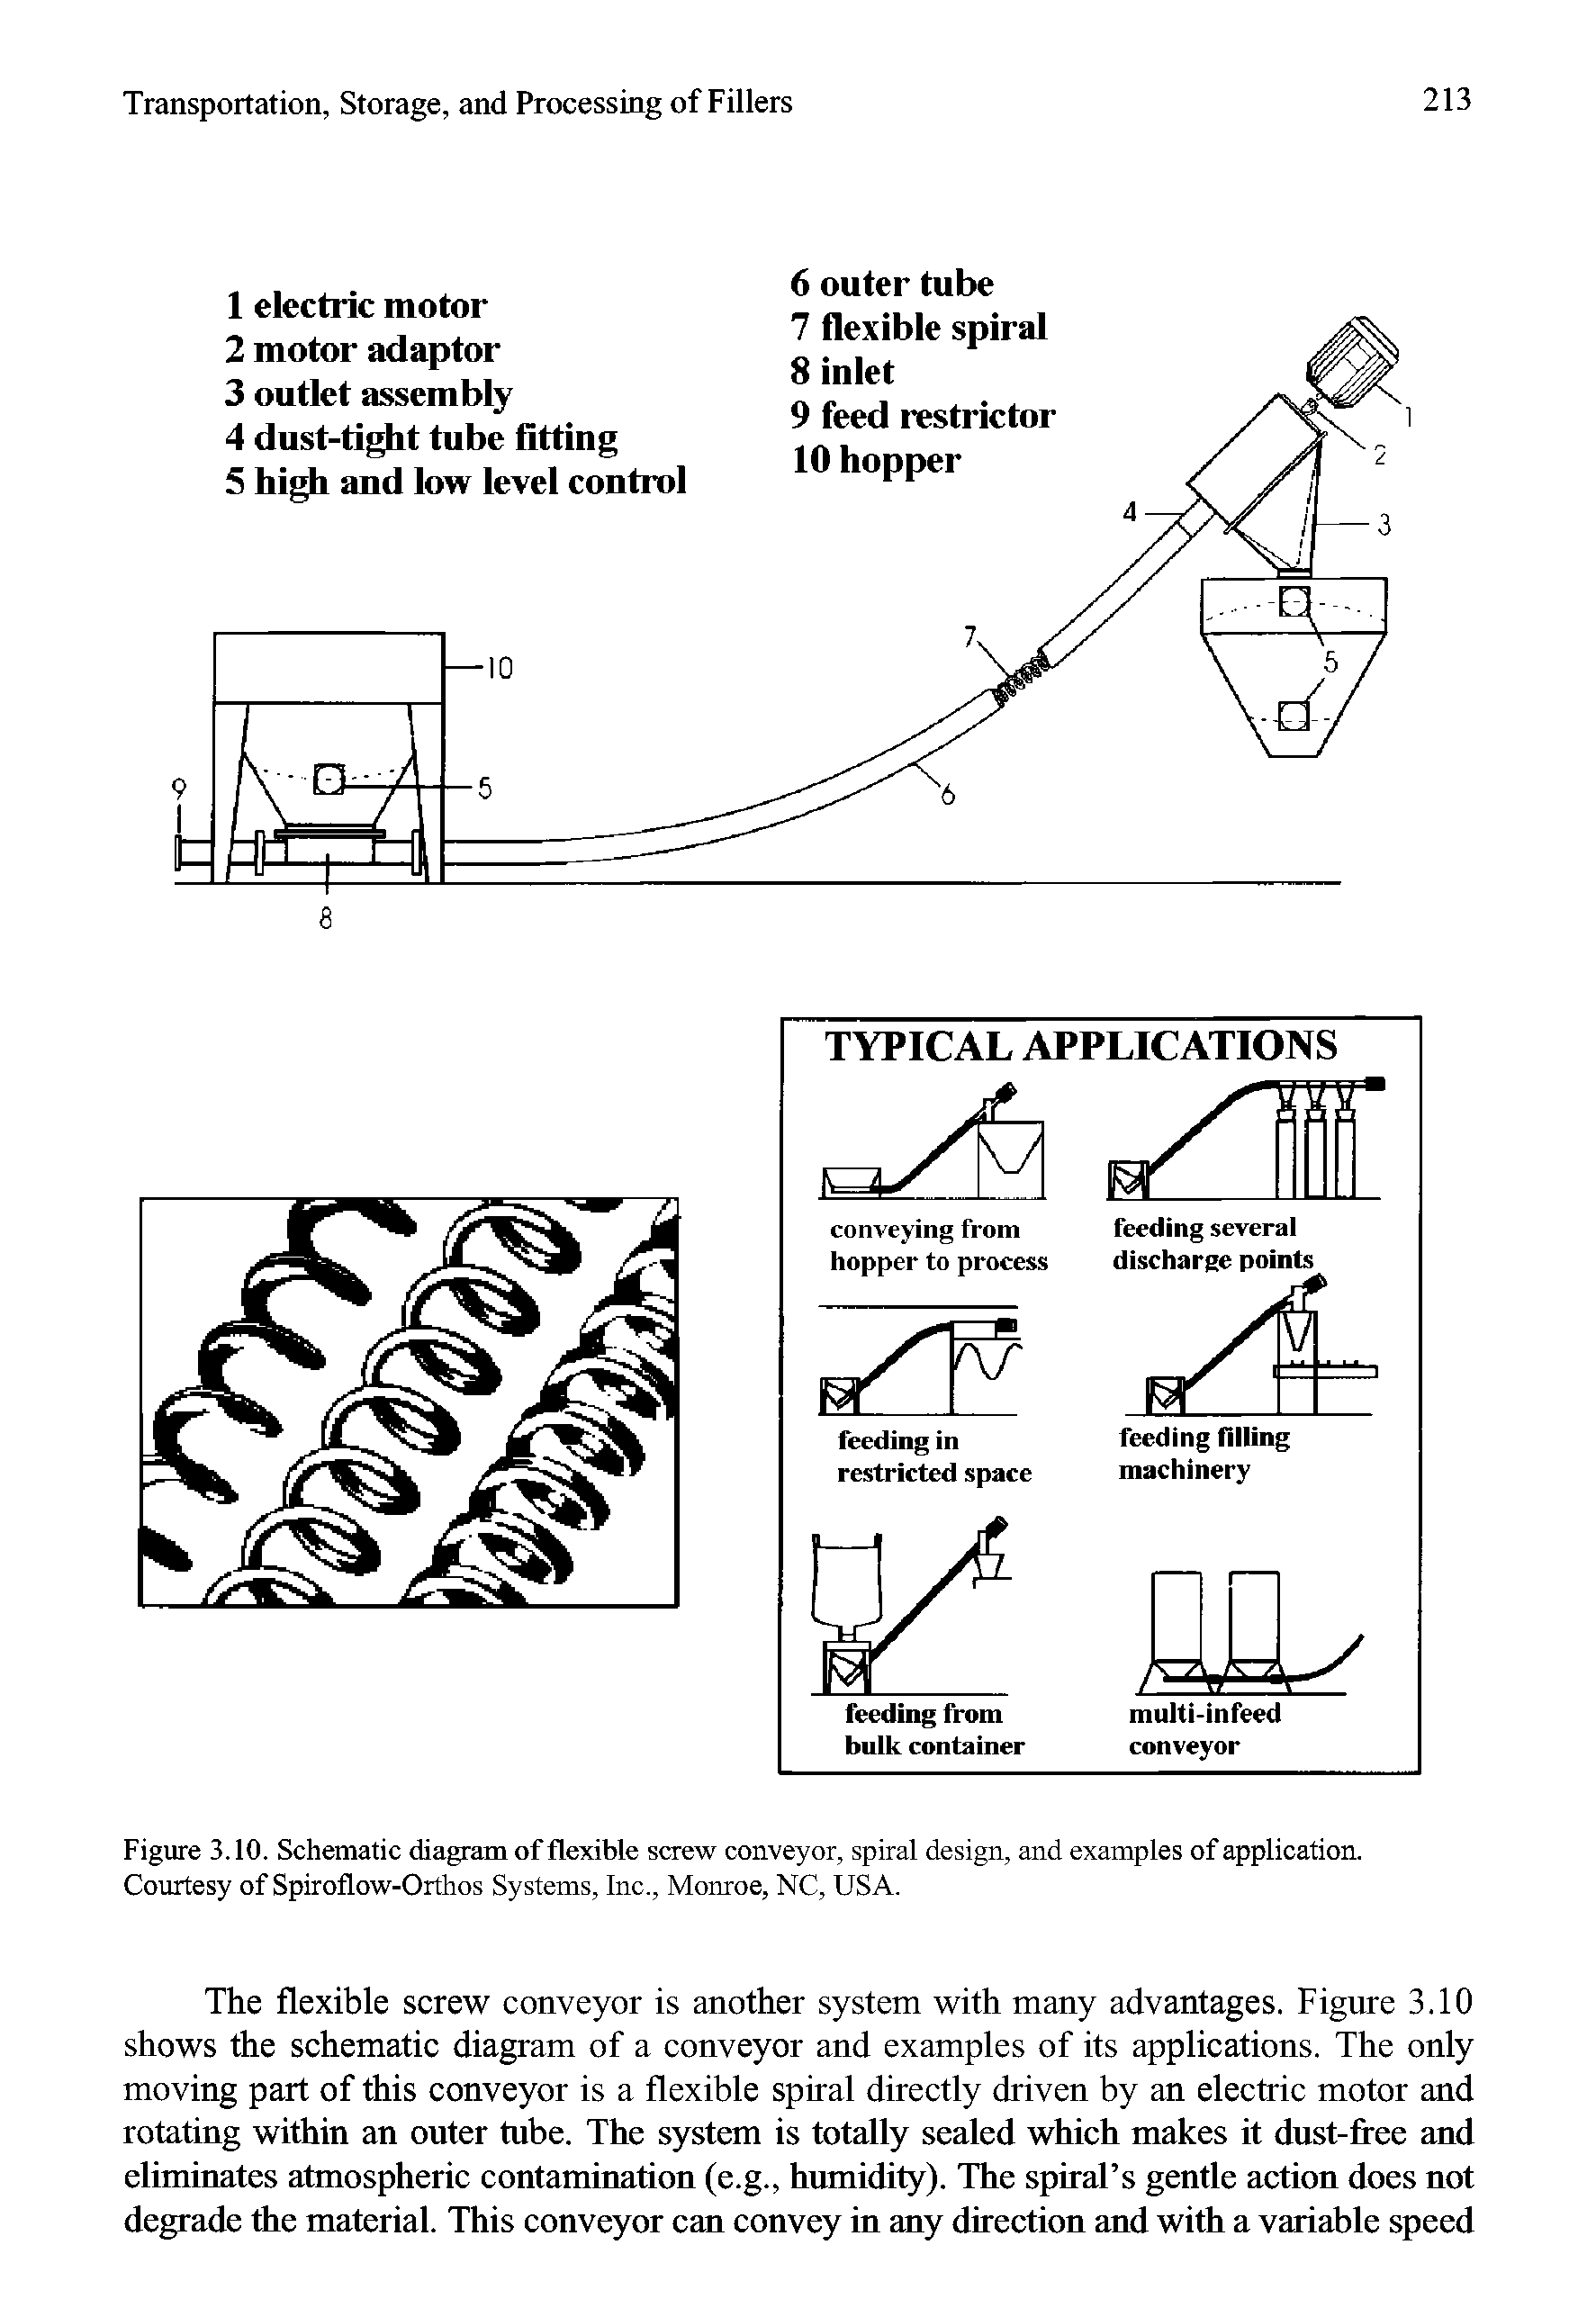 Figure 3.10. Schematic of flexible screw conveyor, spiral design, and examples of application.